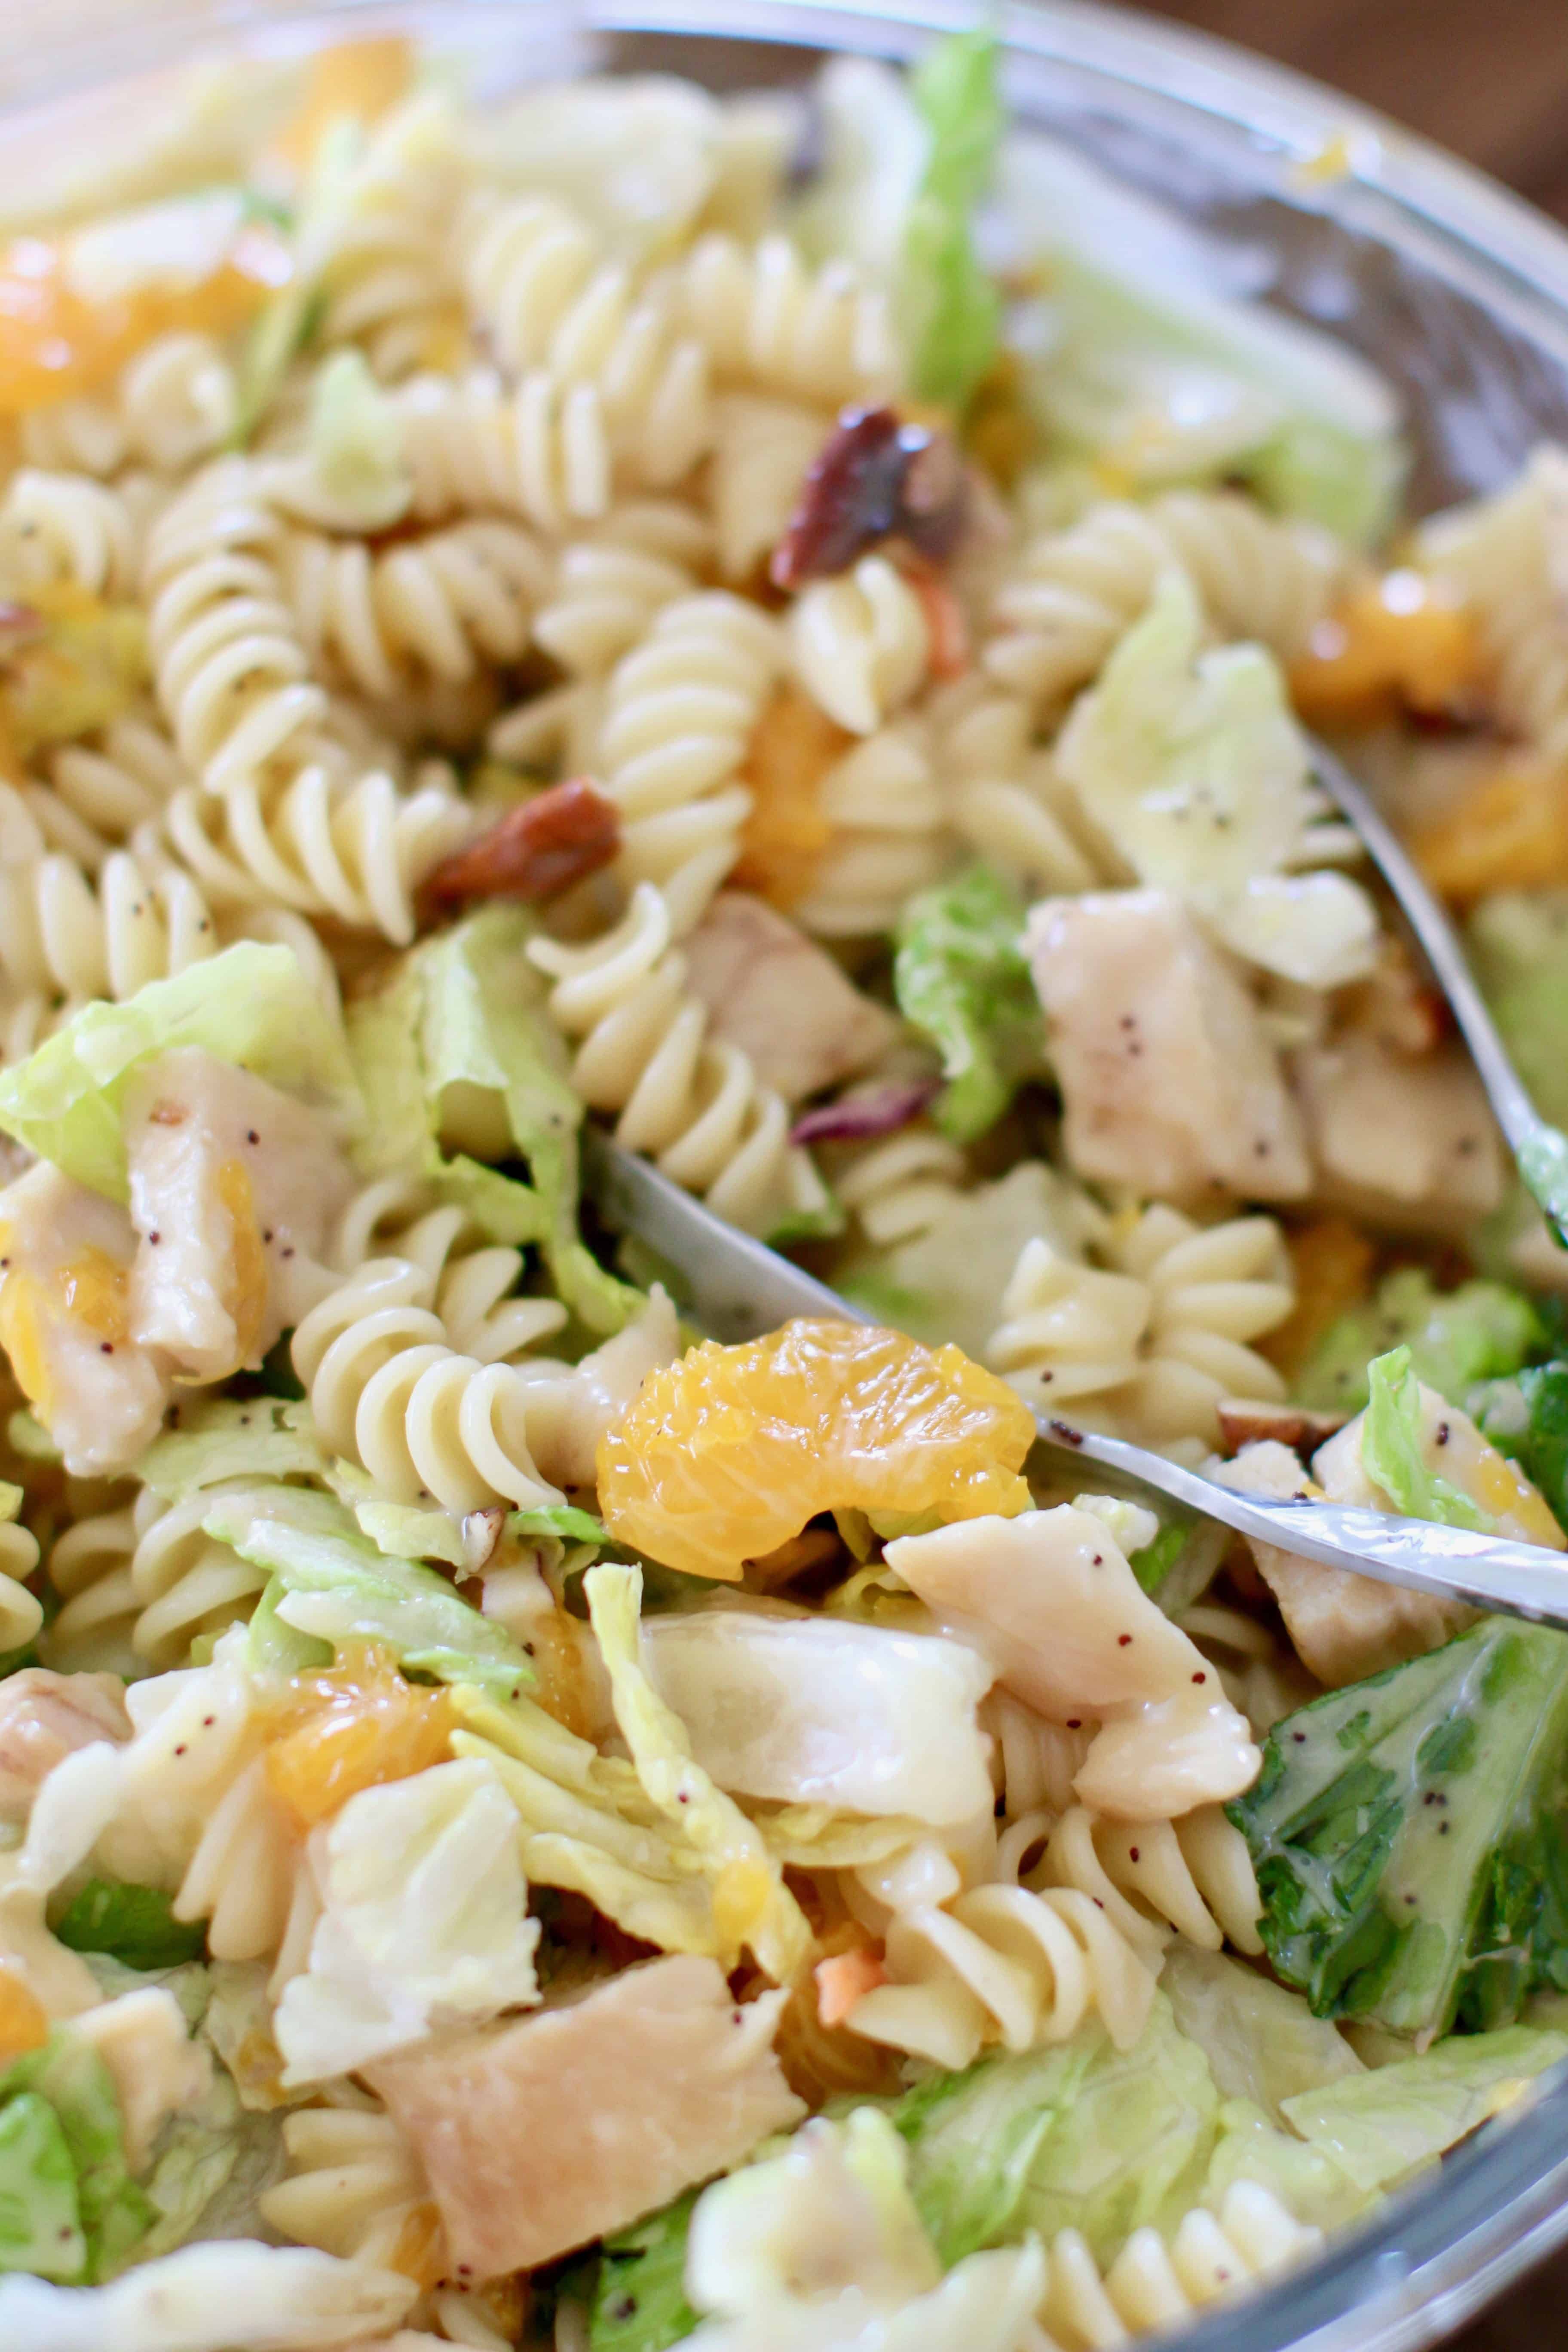 pasta stirred together with lettuce, mandarin oranges, grilled chicken and poppyseed dressing.